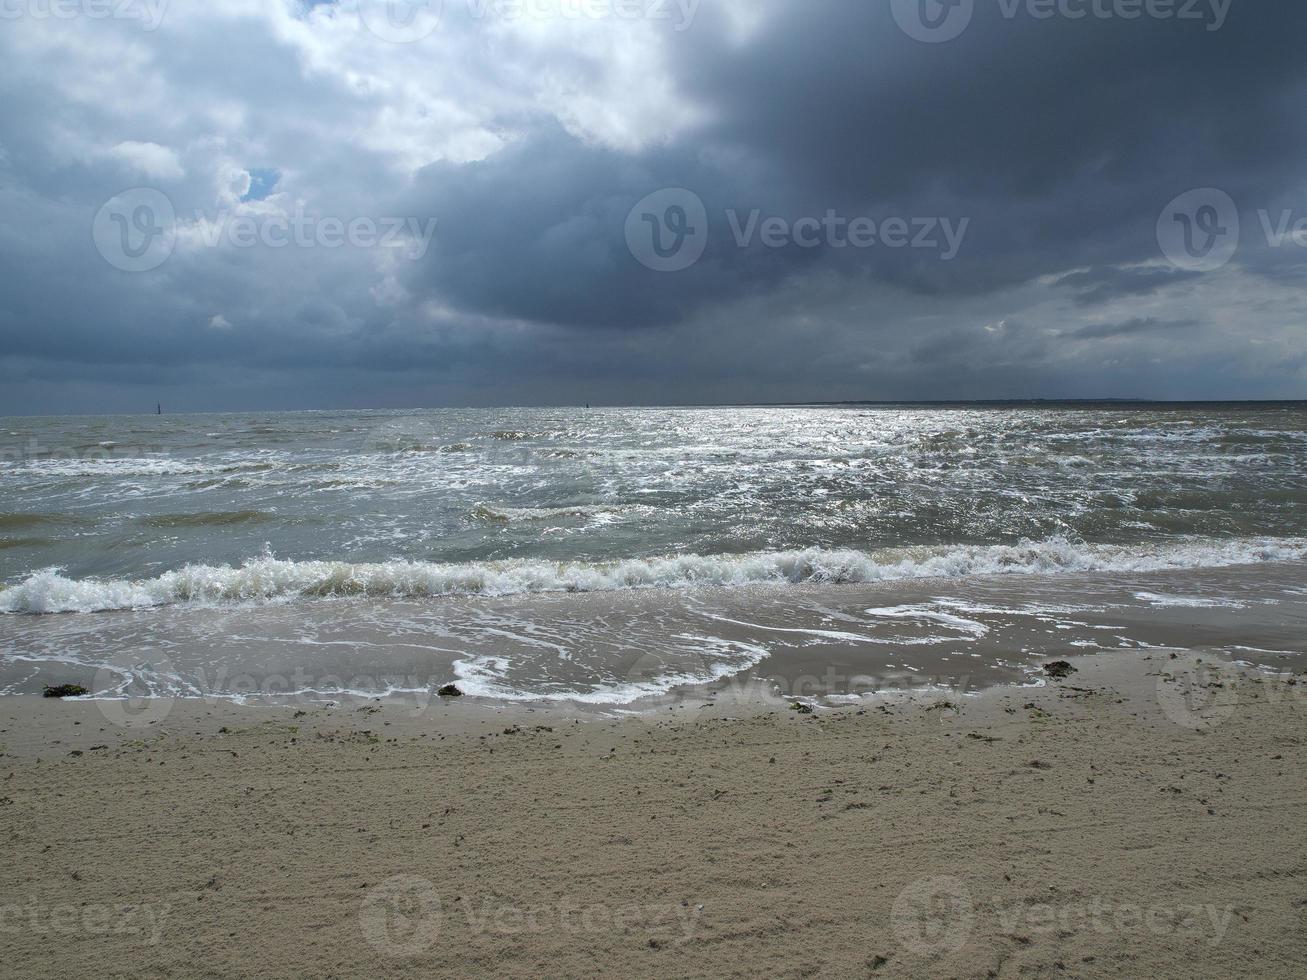 norderney island in germany photo